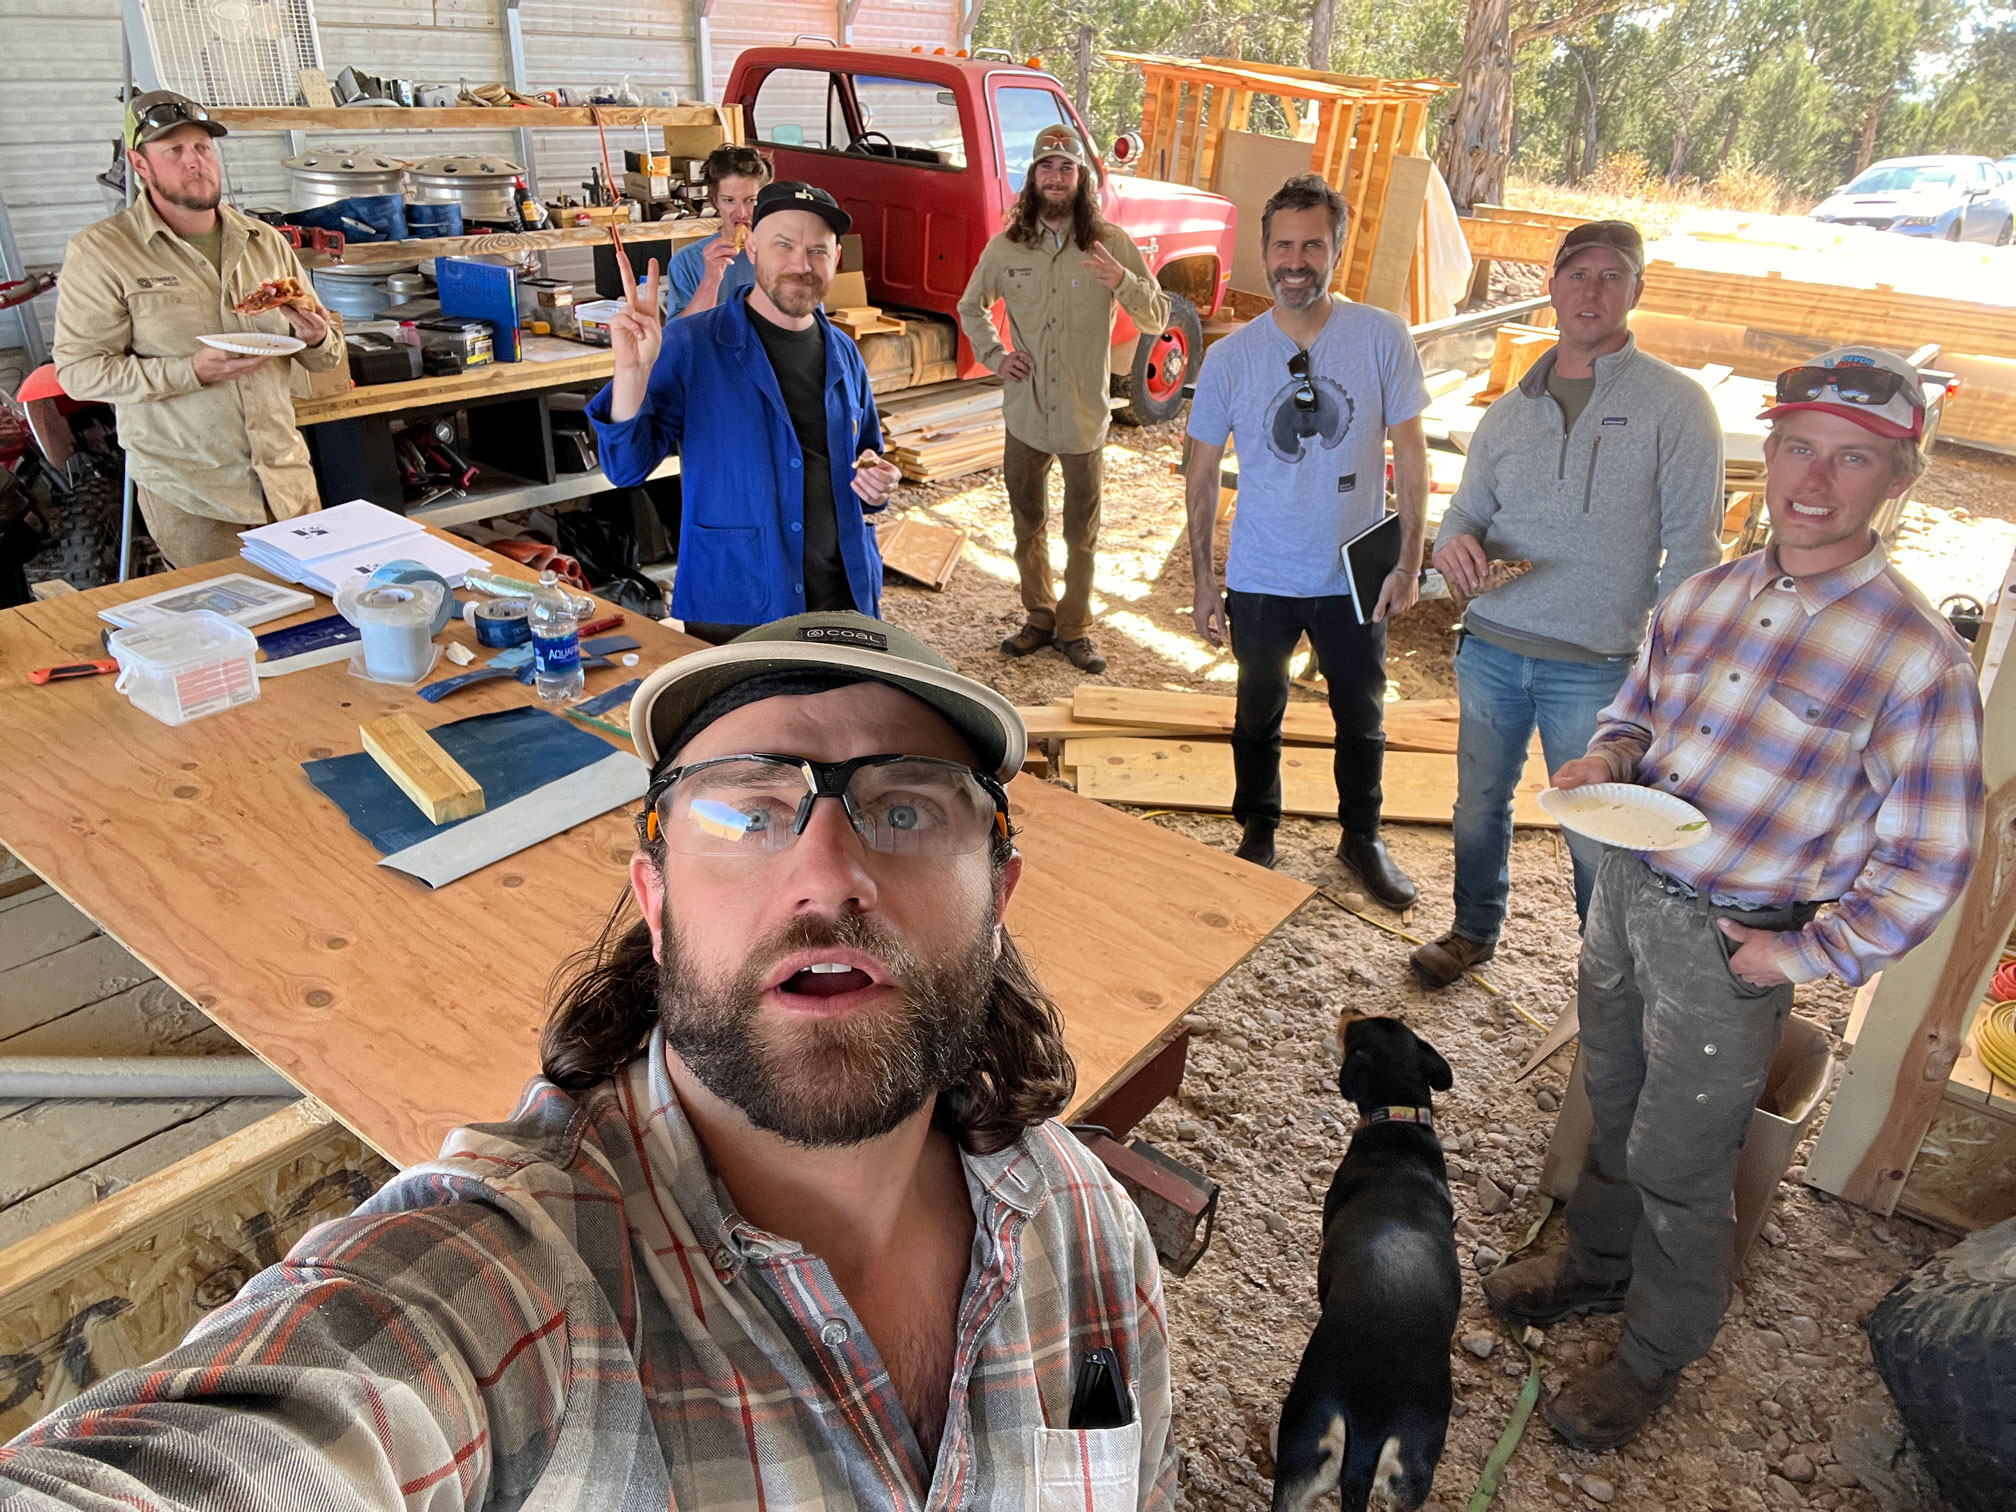 The Timber Age team—including Hamm (photographer), Graham (gray shirt), and Hanson (gray pullover)—learn about high-performance building supplies from Johnny Rezvani of 475.Supply (blue shirt). “I decided to work with Timber Age because I felt like our goals and values were aligned, their interest and commitment to building science, and I also thought that them being a startup would mean that they would be more collaborative than other more established companies which has very much been the case. I also just really liked everyone I met there and their general ethos,” says Graham. Photo courtesy of Chris Hamm